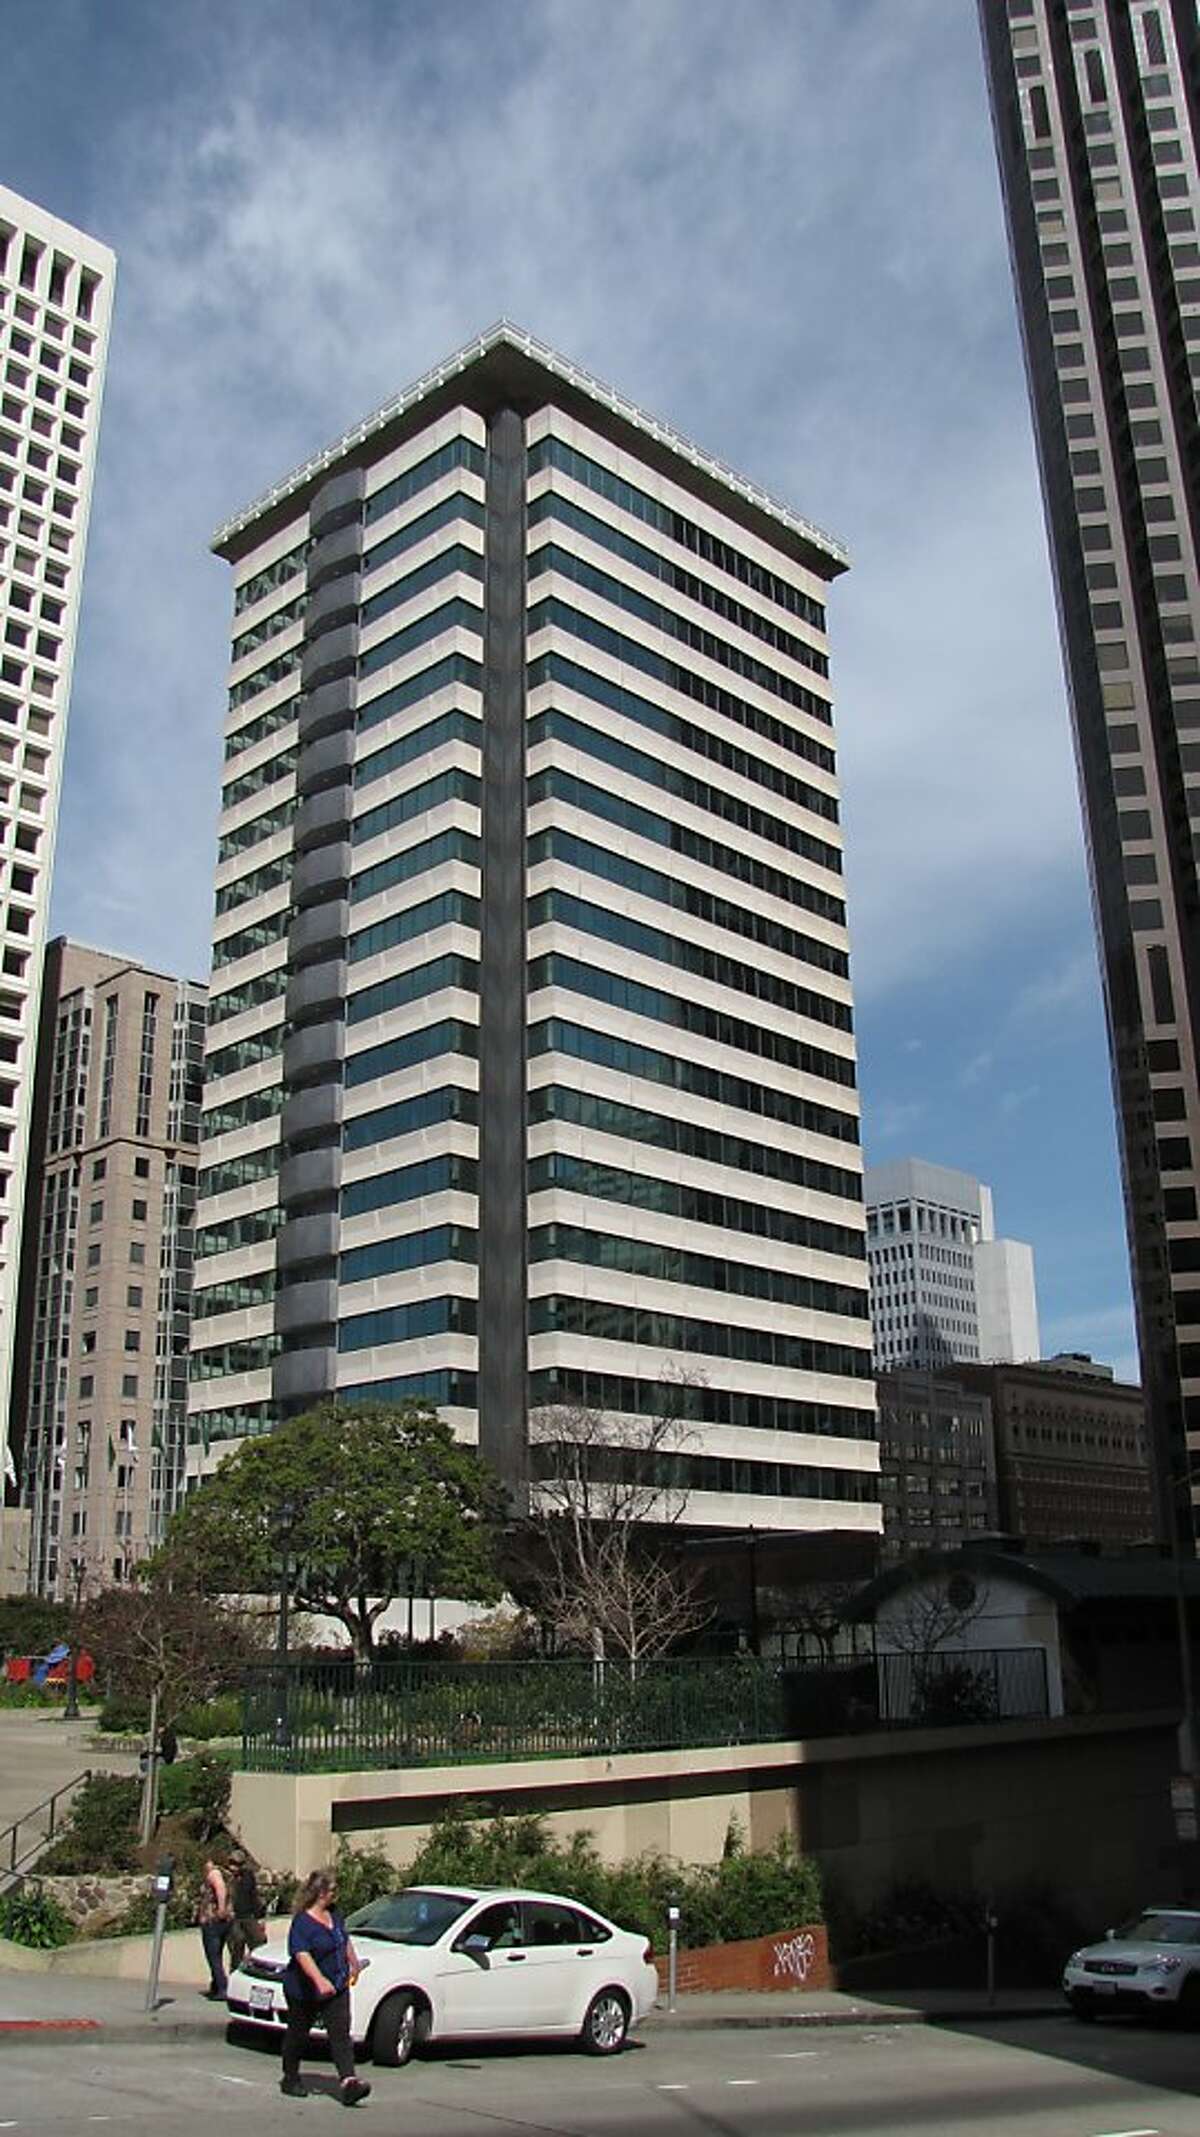 The International Building at 601 California St. opened in 1960. It is one of San Francisco's first International Style towers and was designed by the firm Anshen & Allen.